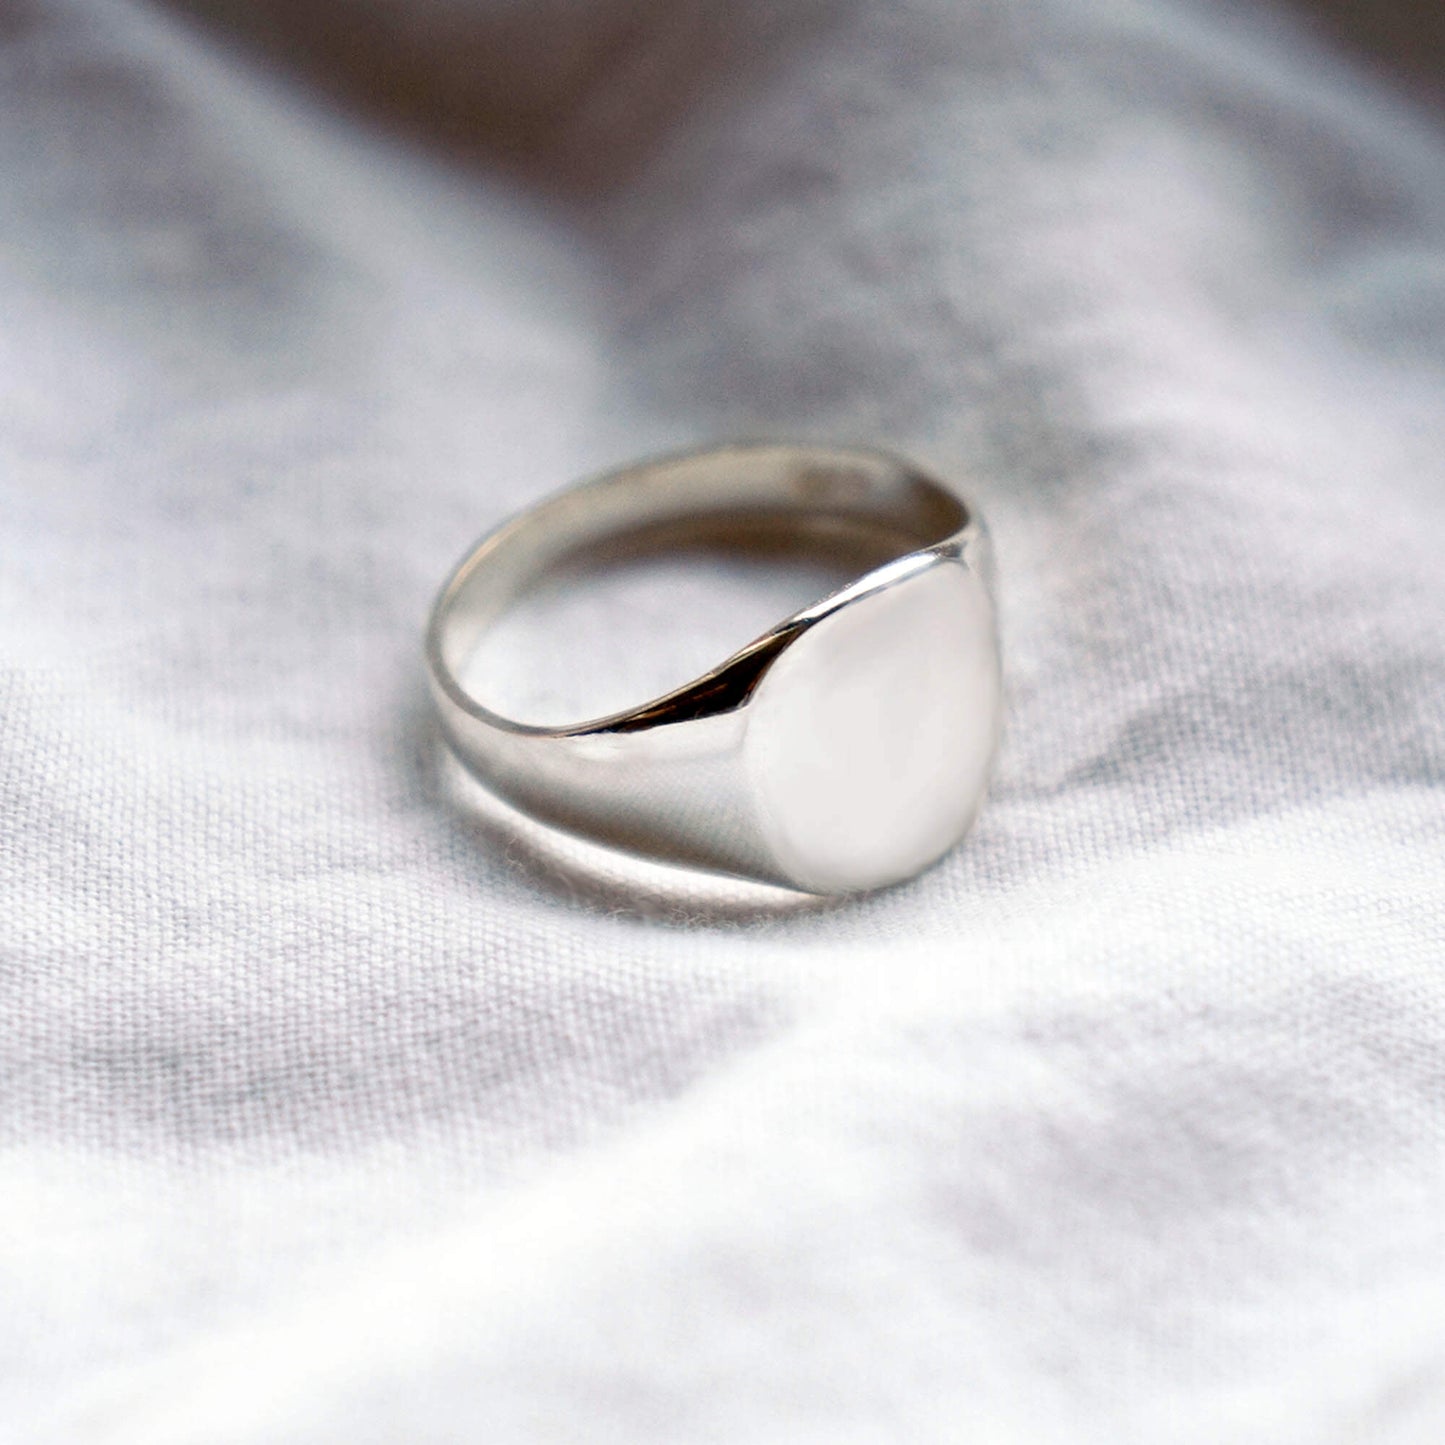 STERLING SILVER CUSHION SIGNET RING